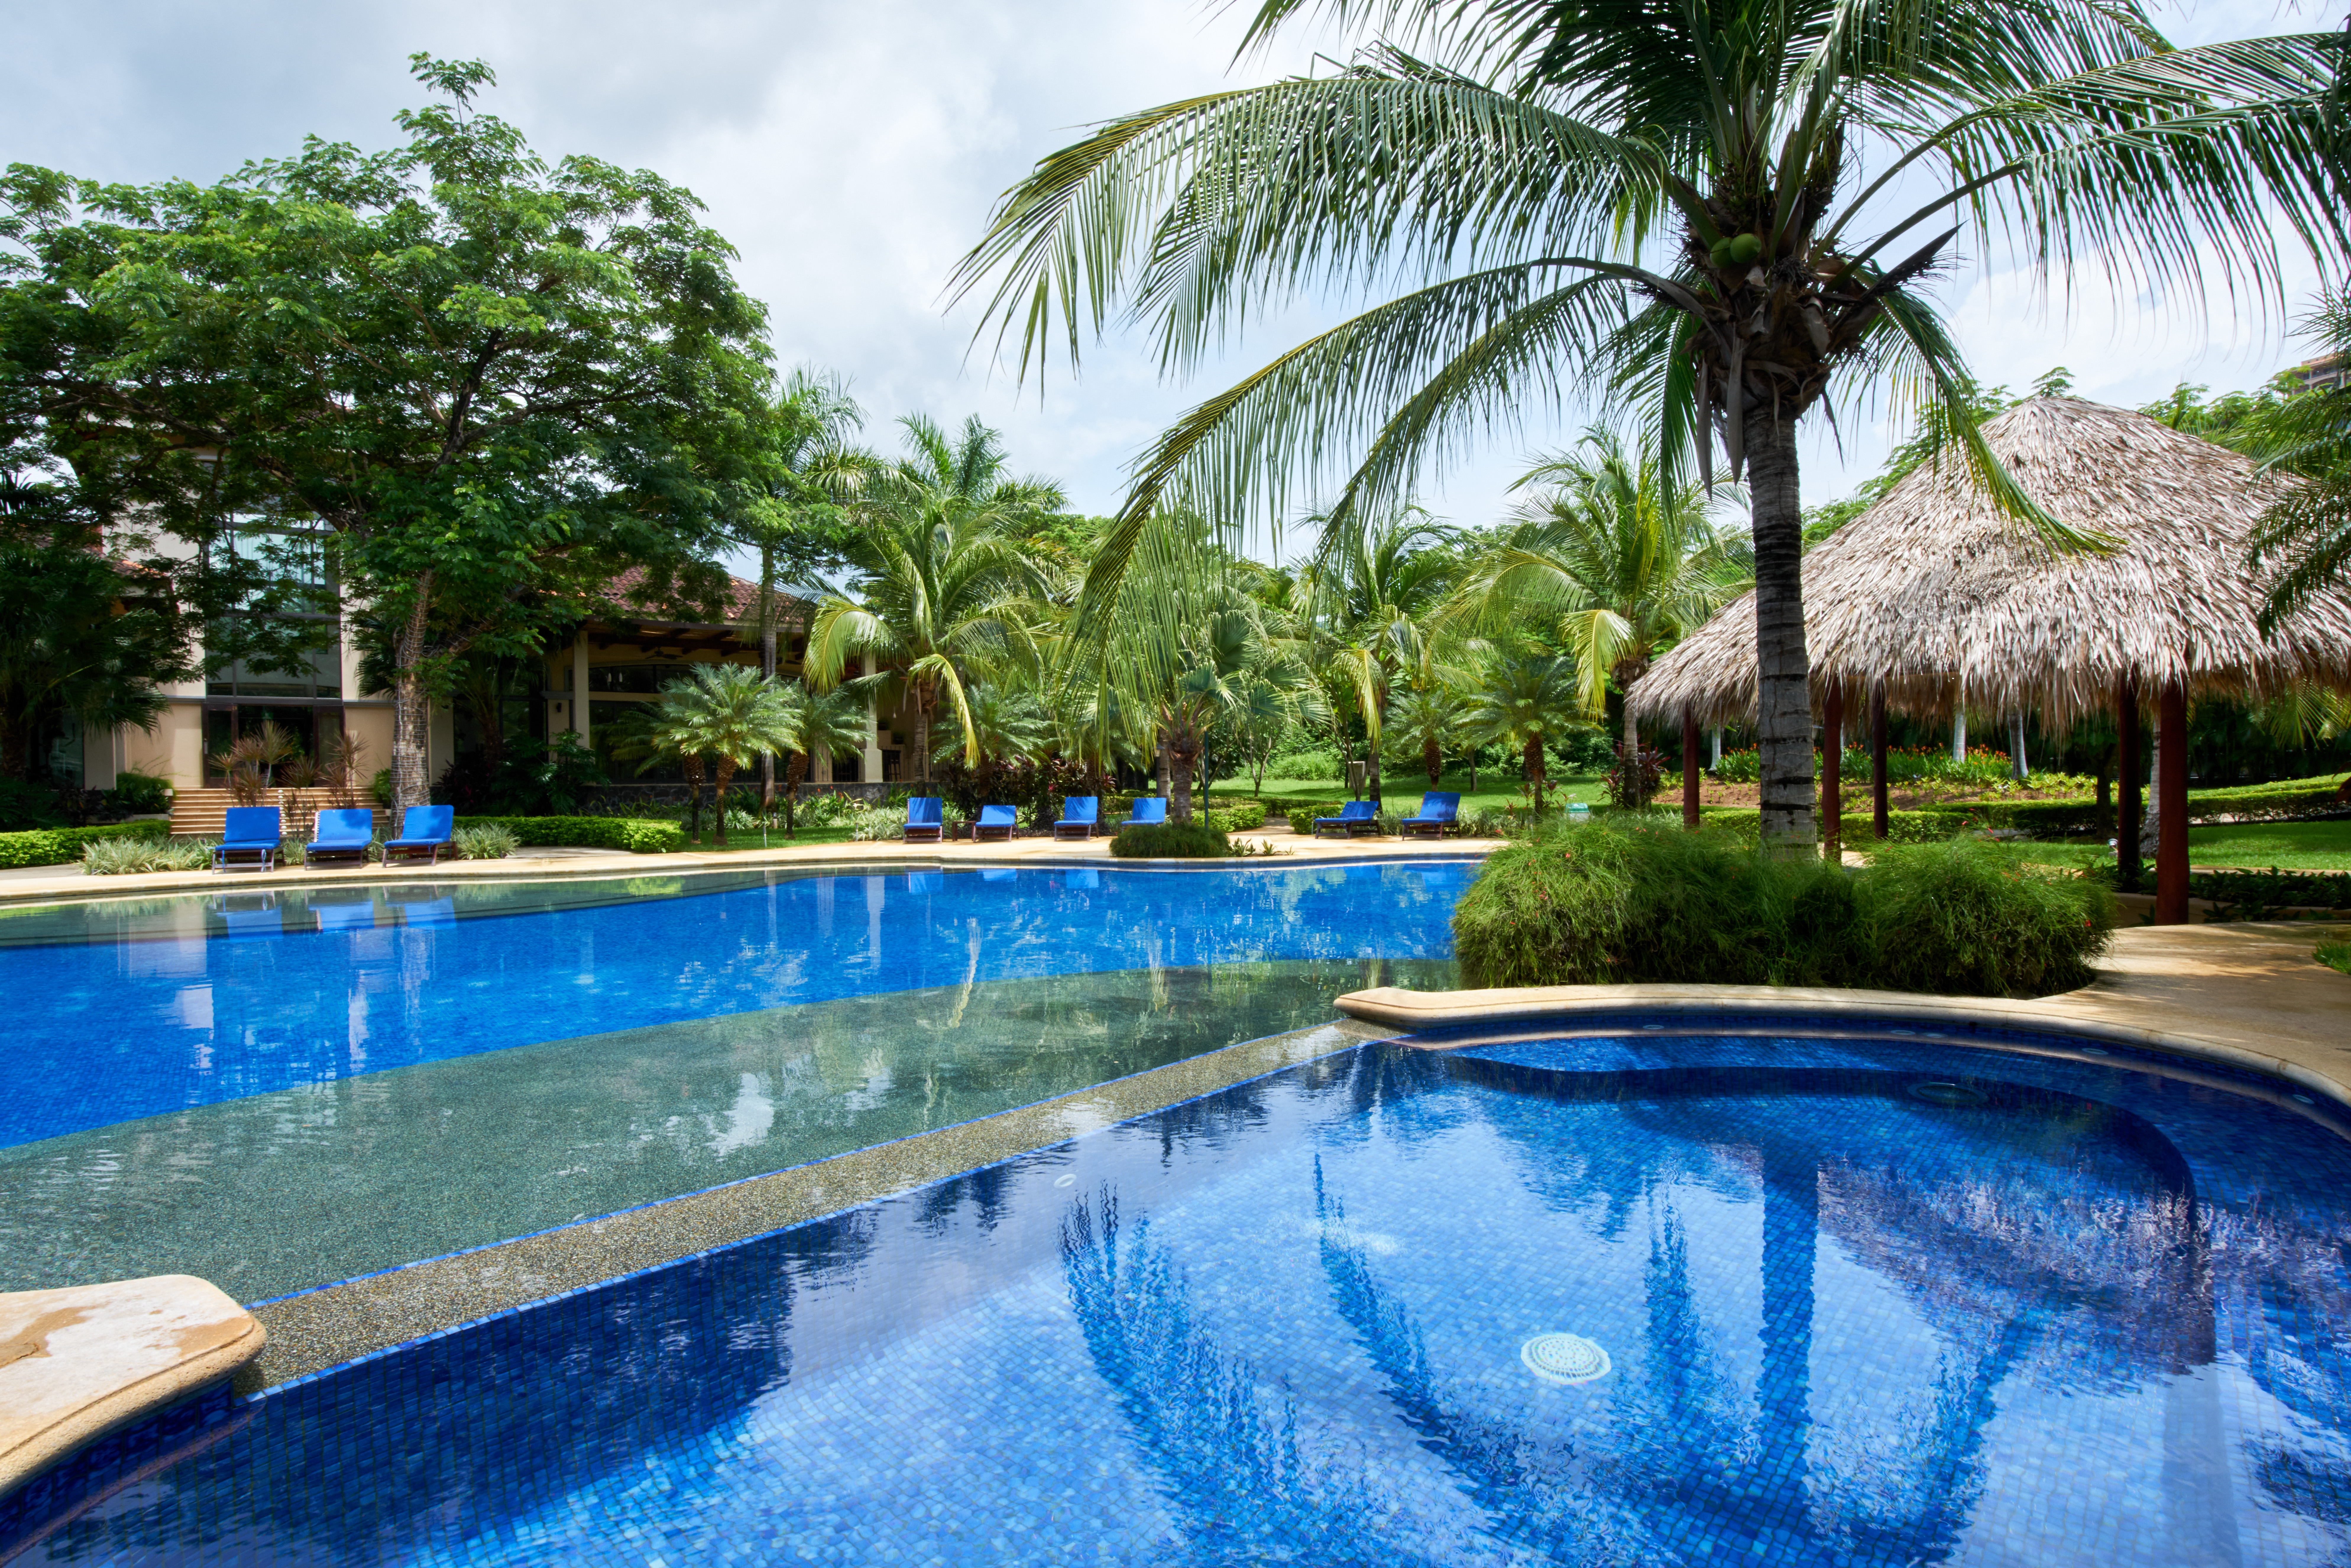 Ocotal Real Estate for sale. Luxury Real Estate in playa ocotal.